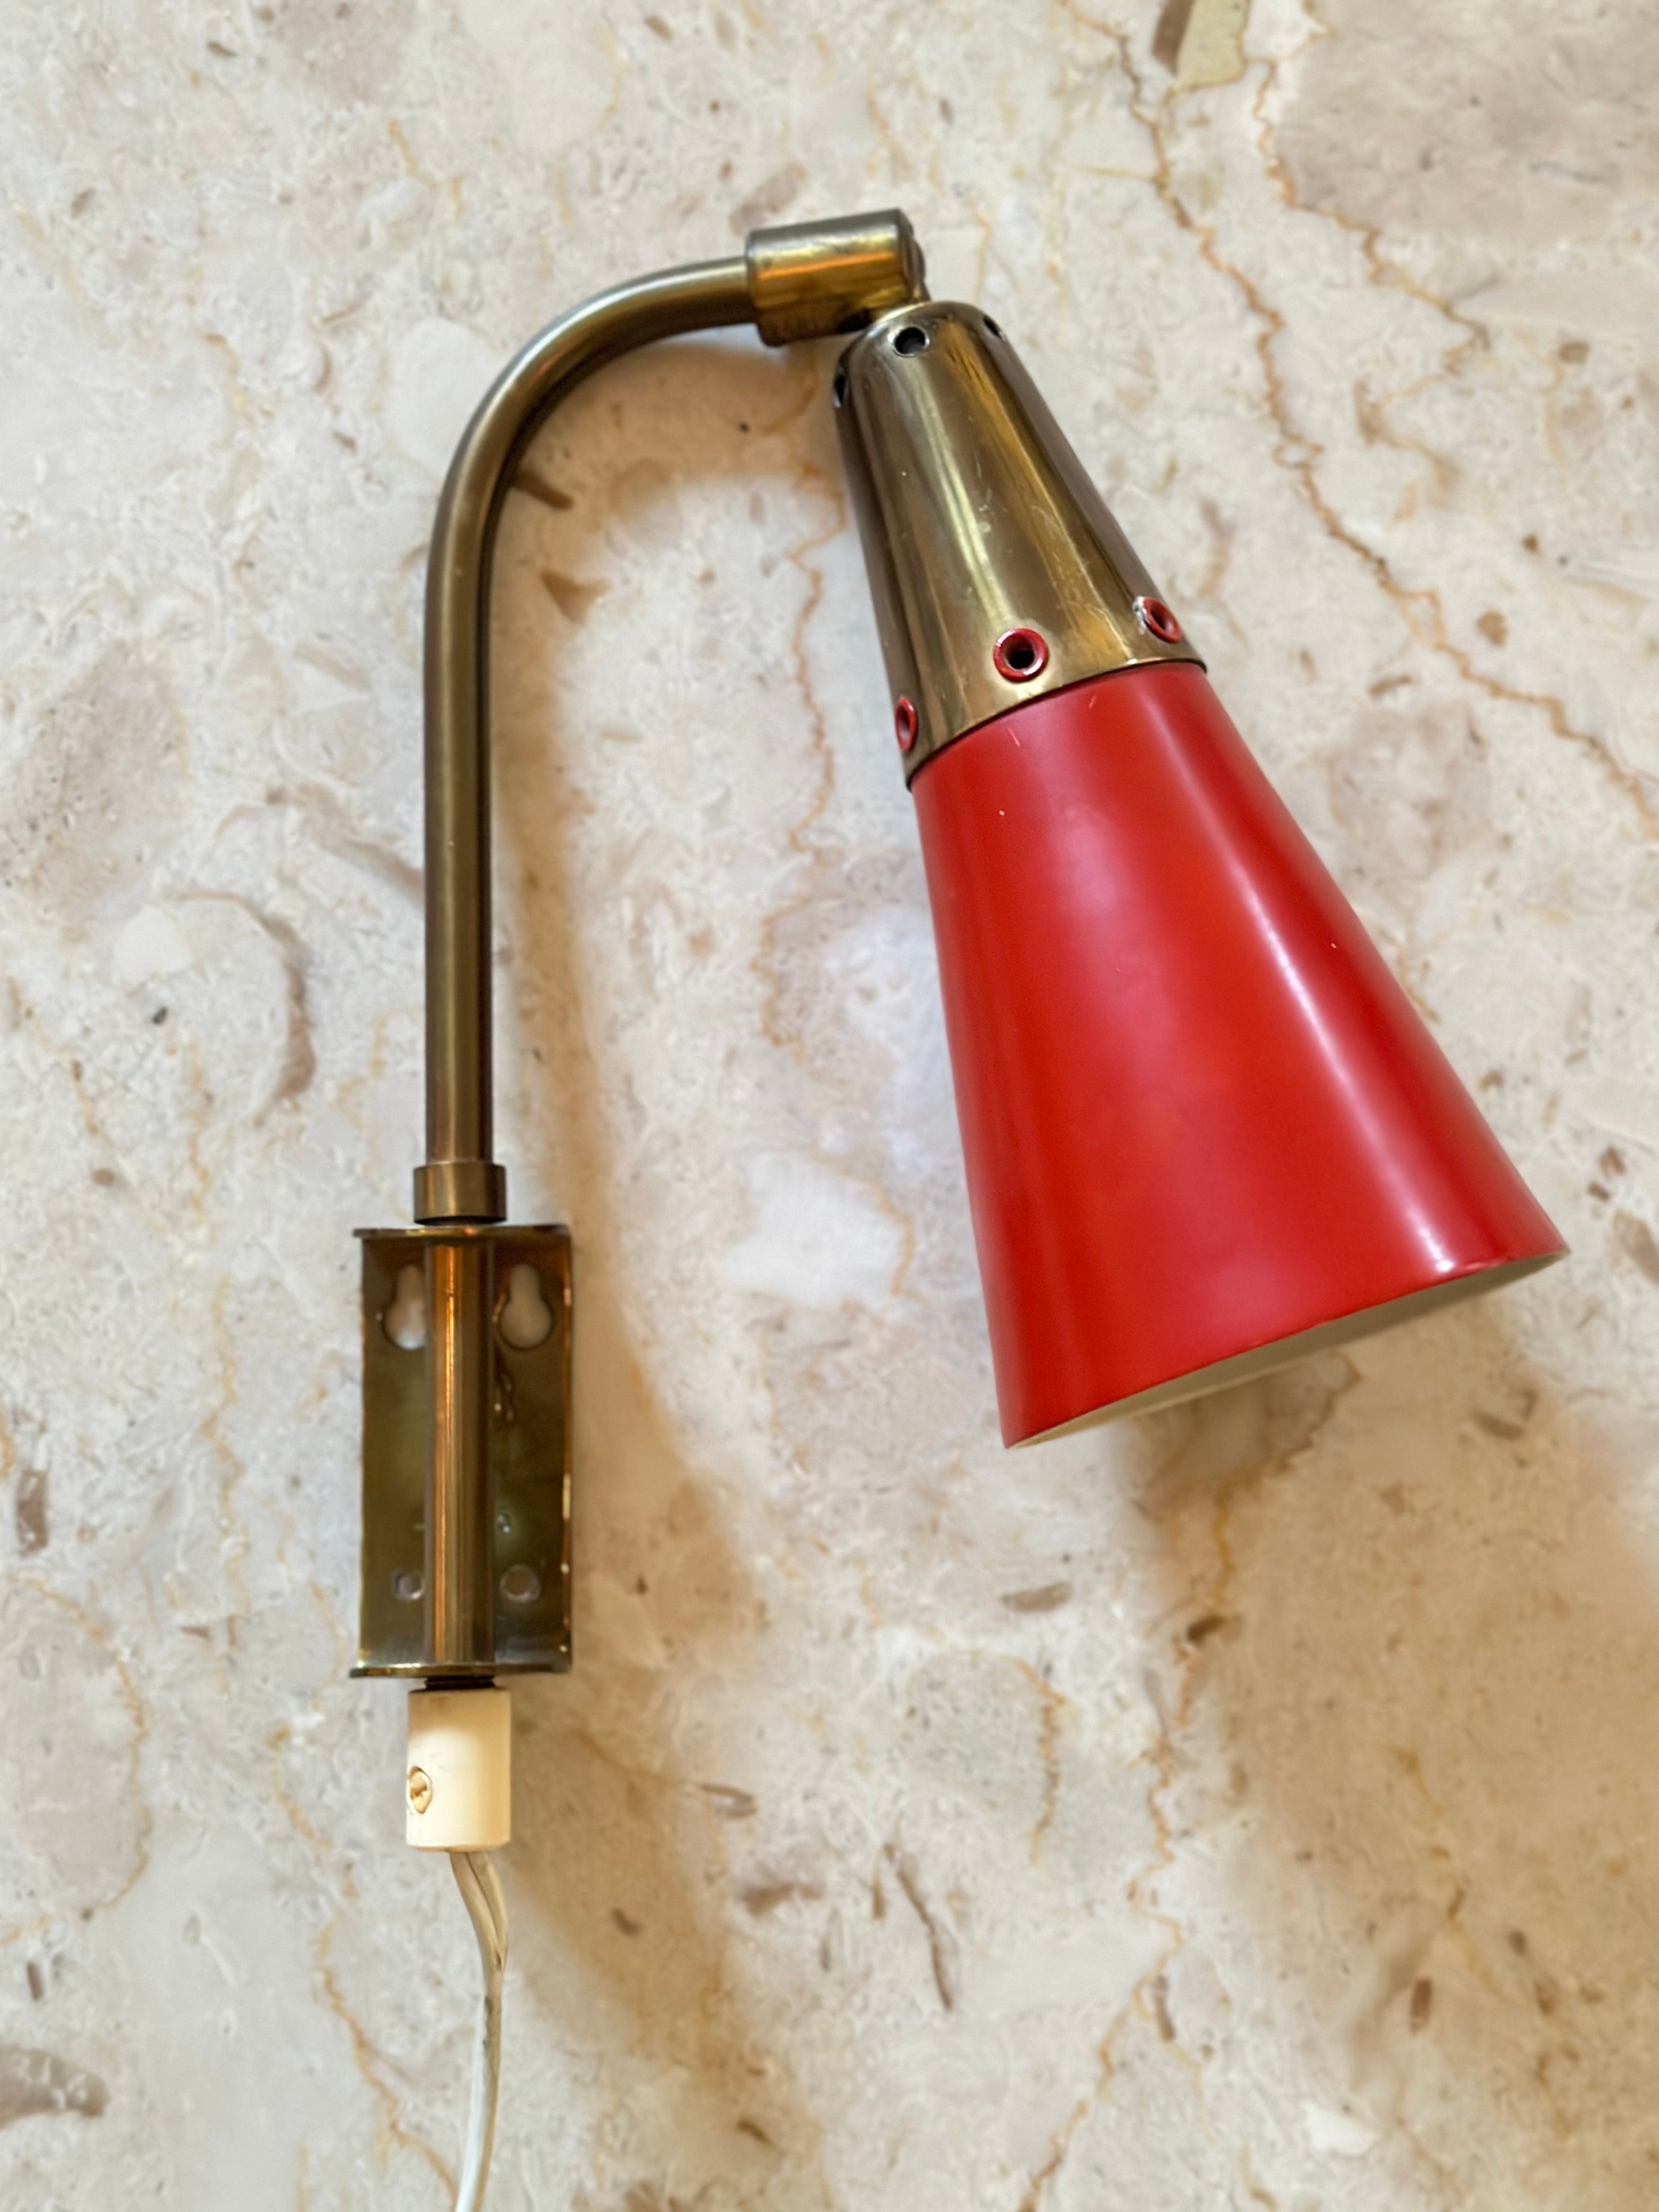 Pair of Swedish Modern adjustable brass wall lights with red lacquered shades and white reflective inside. Very decorative bedside lamps made by Upsala Armaturfabrik AB in the 1950s. In very good vintage condition with minimal wear to the lacquer.